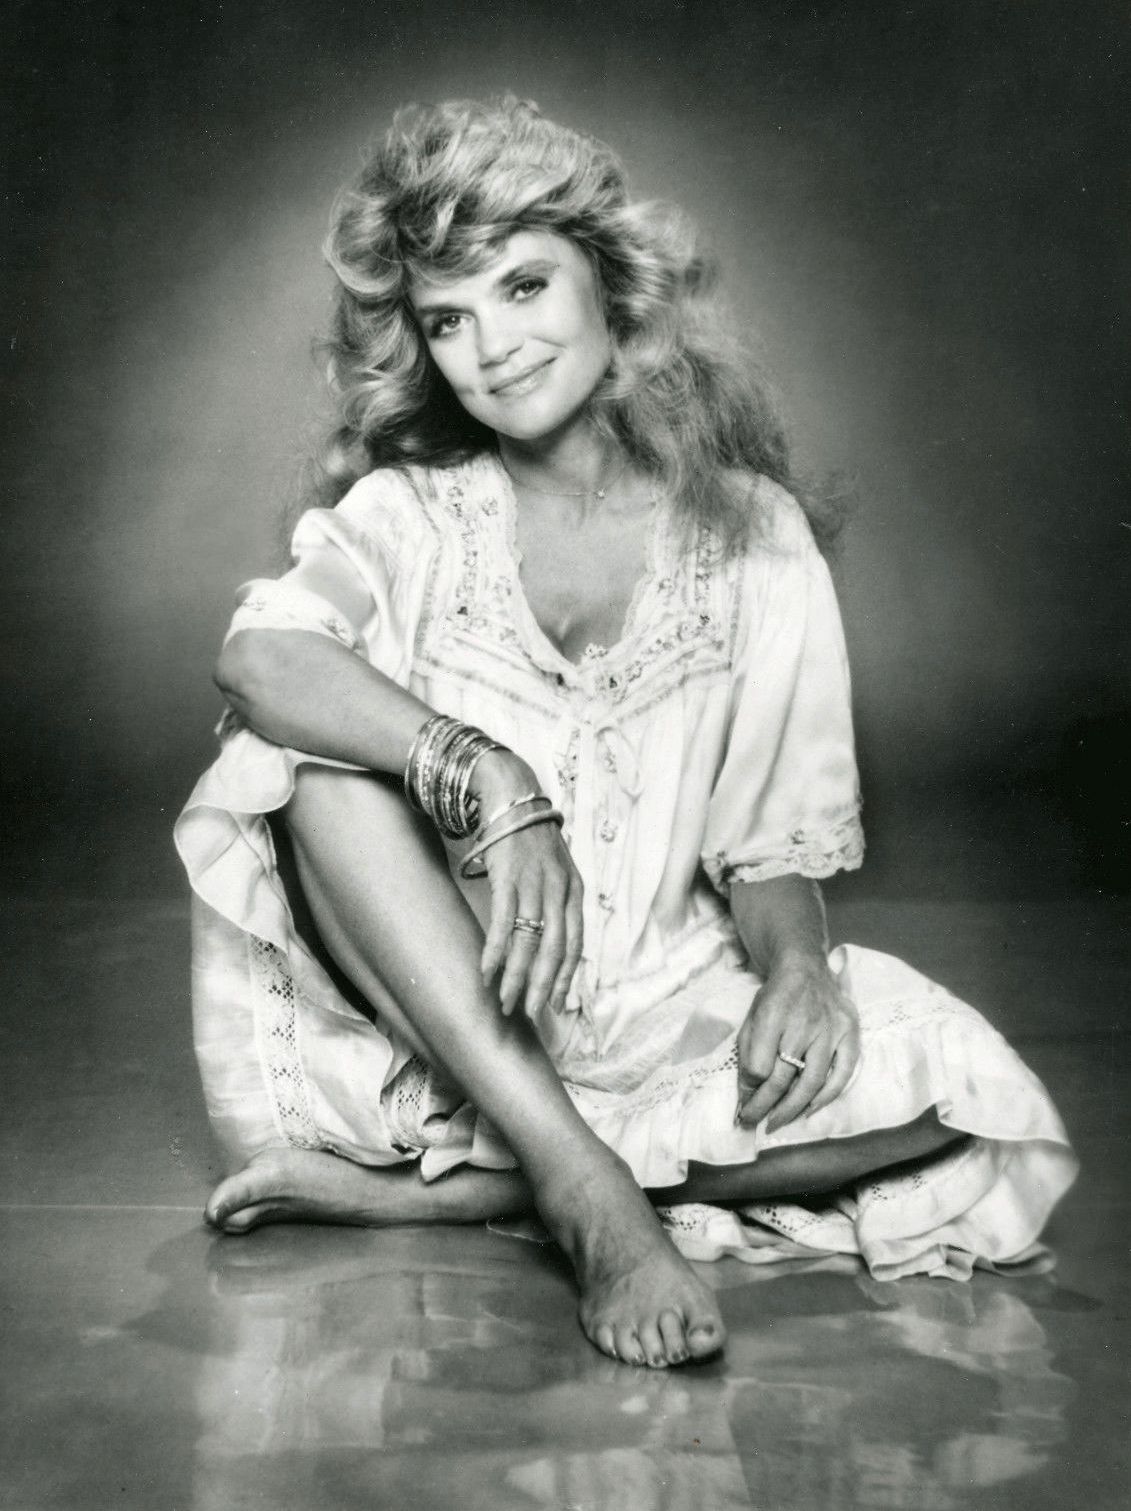 People who liked Dyan Cannon's feet, also liked.